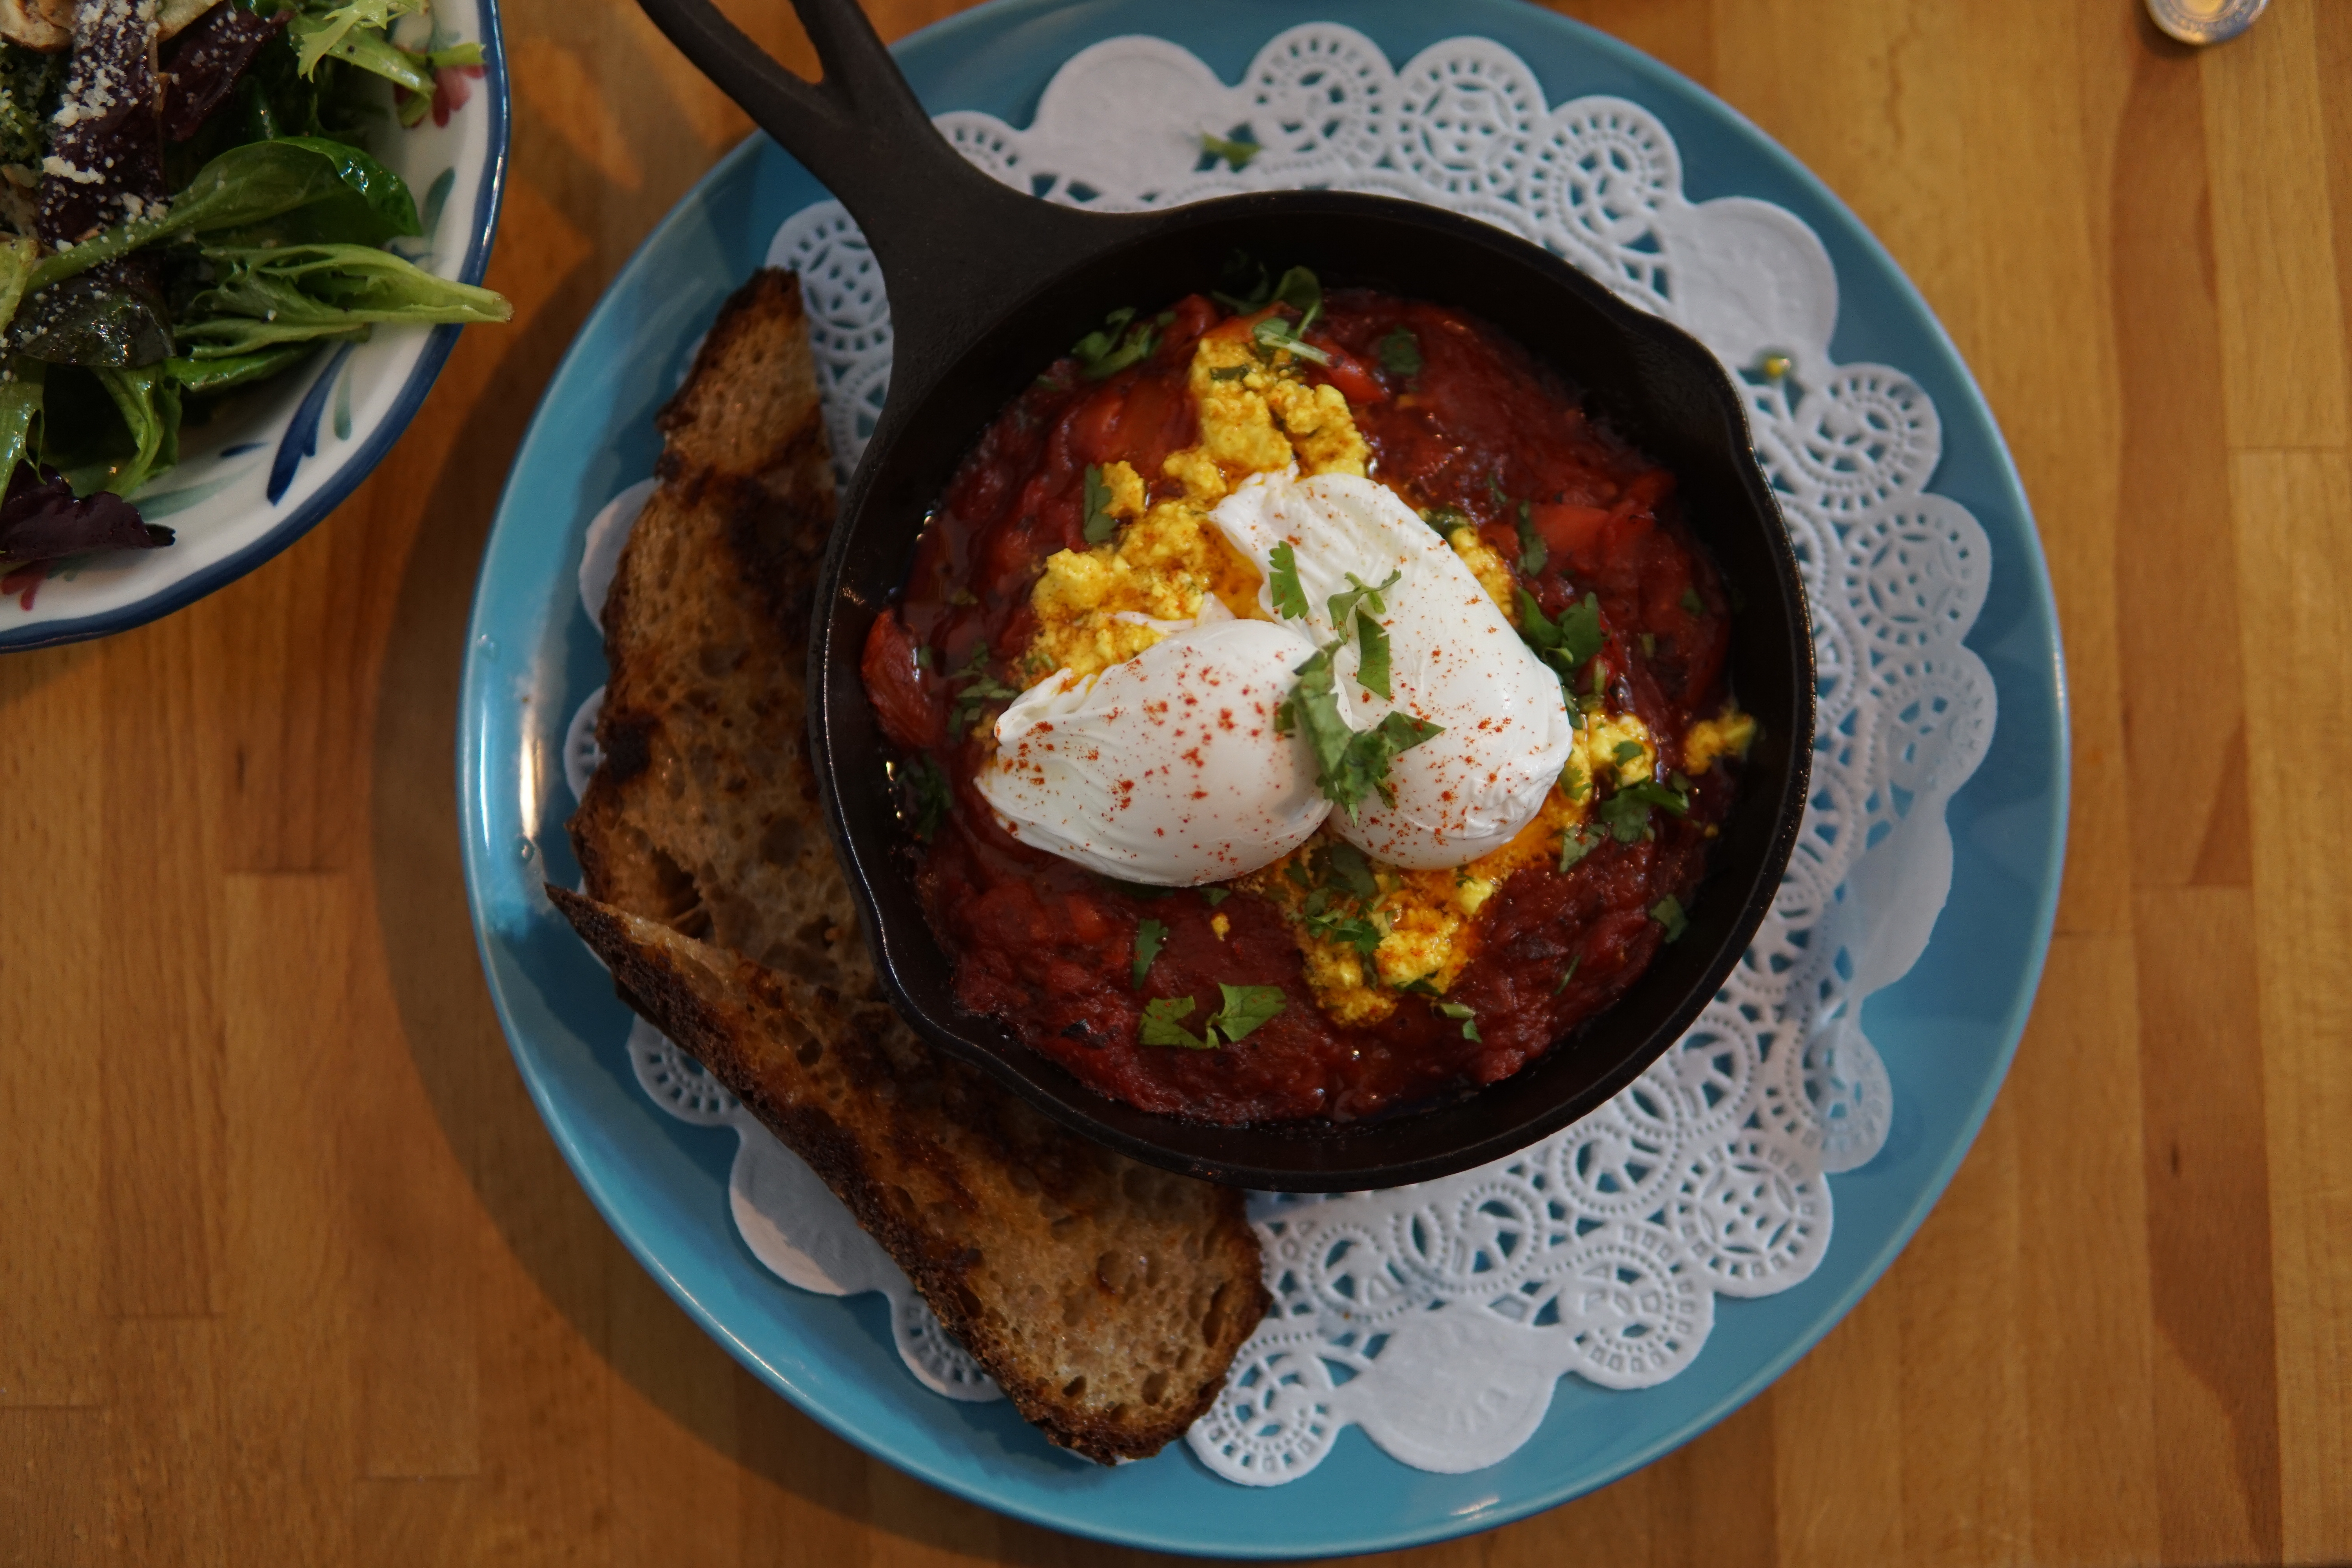 Two poached eggs sit in a cast-iron skillet, which sits on a blue plate with a doily and two pieces of toast